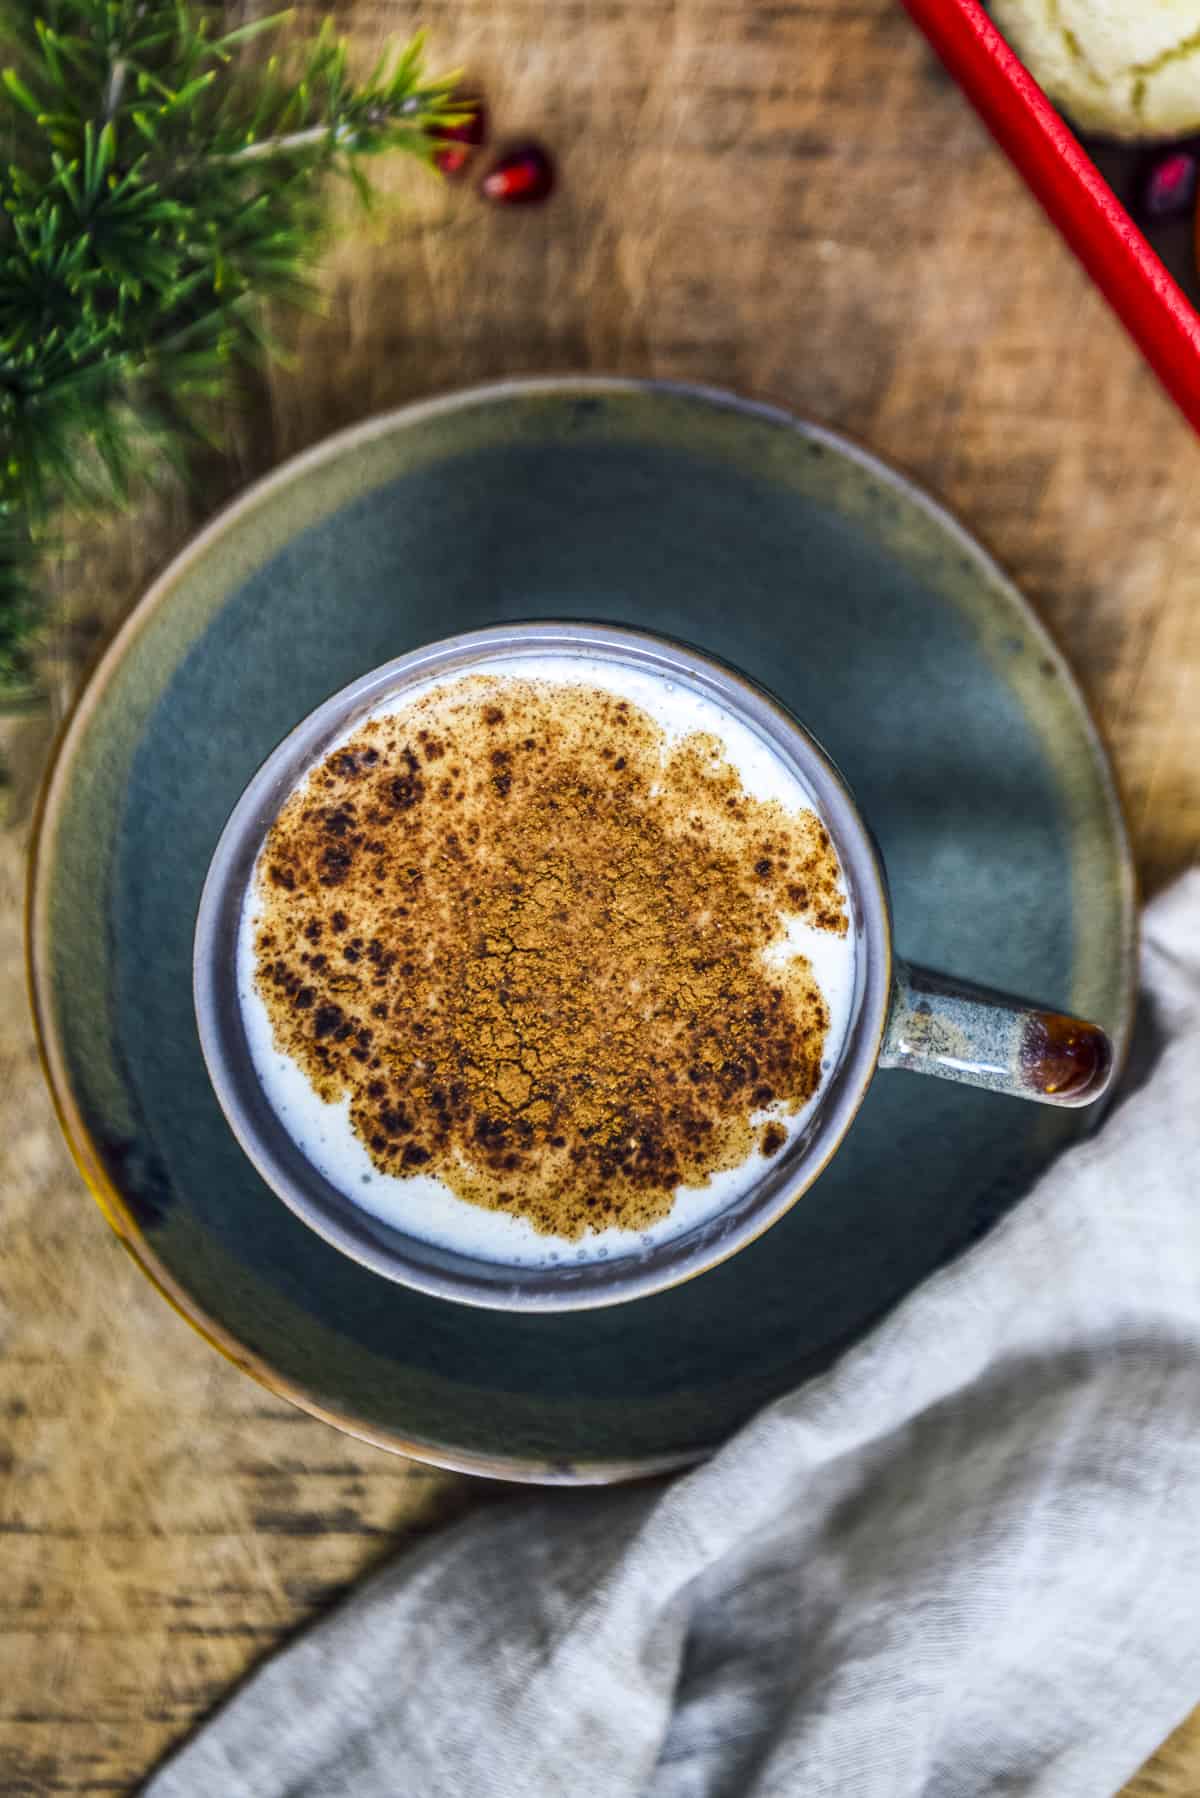 Salep topped with cinnamon in a cup photographed on a wooden board.